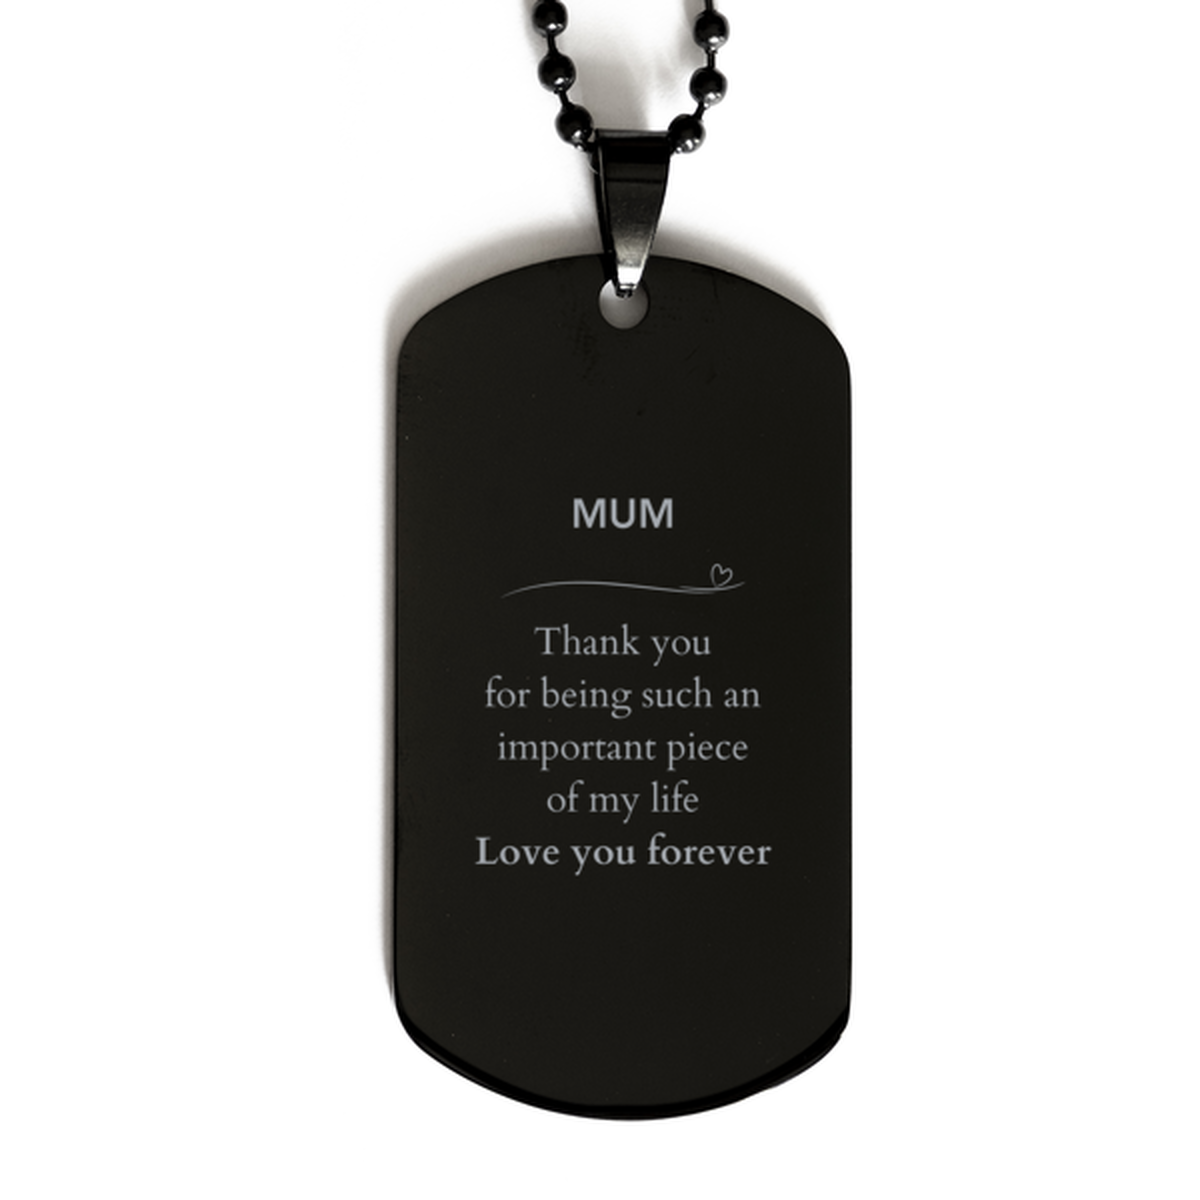 Appropriate Mum Black Dog Tag Epic Birthday Gifts for Mum Thank you for being such an important piece of my life Mum Christmas Mothers Fathers Day